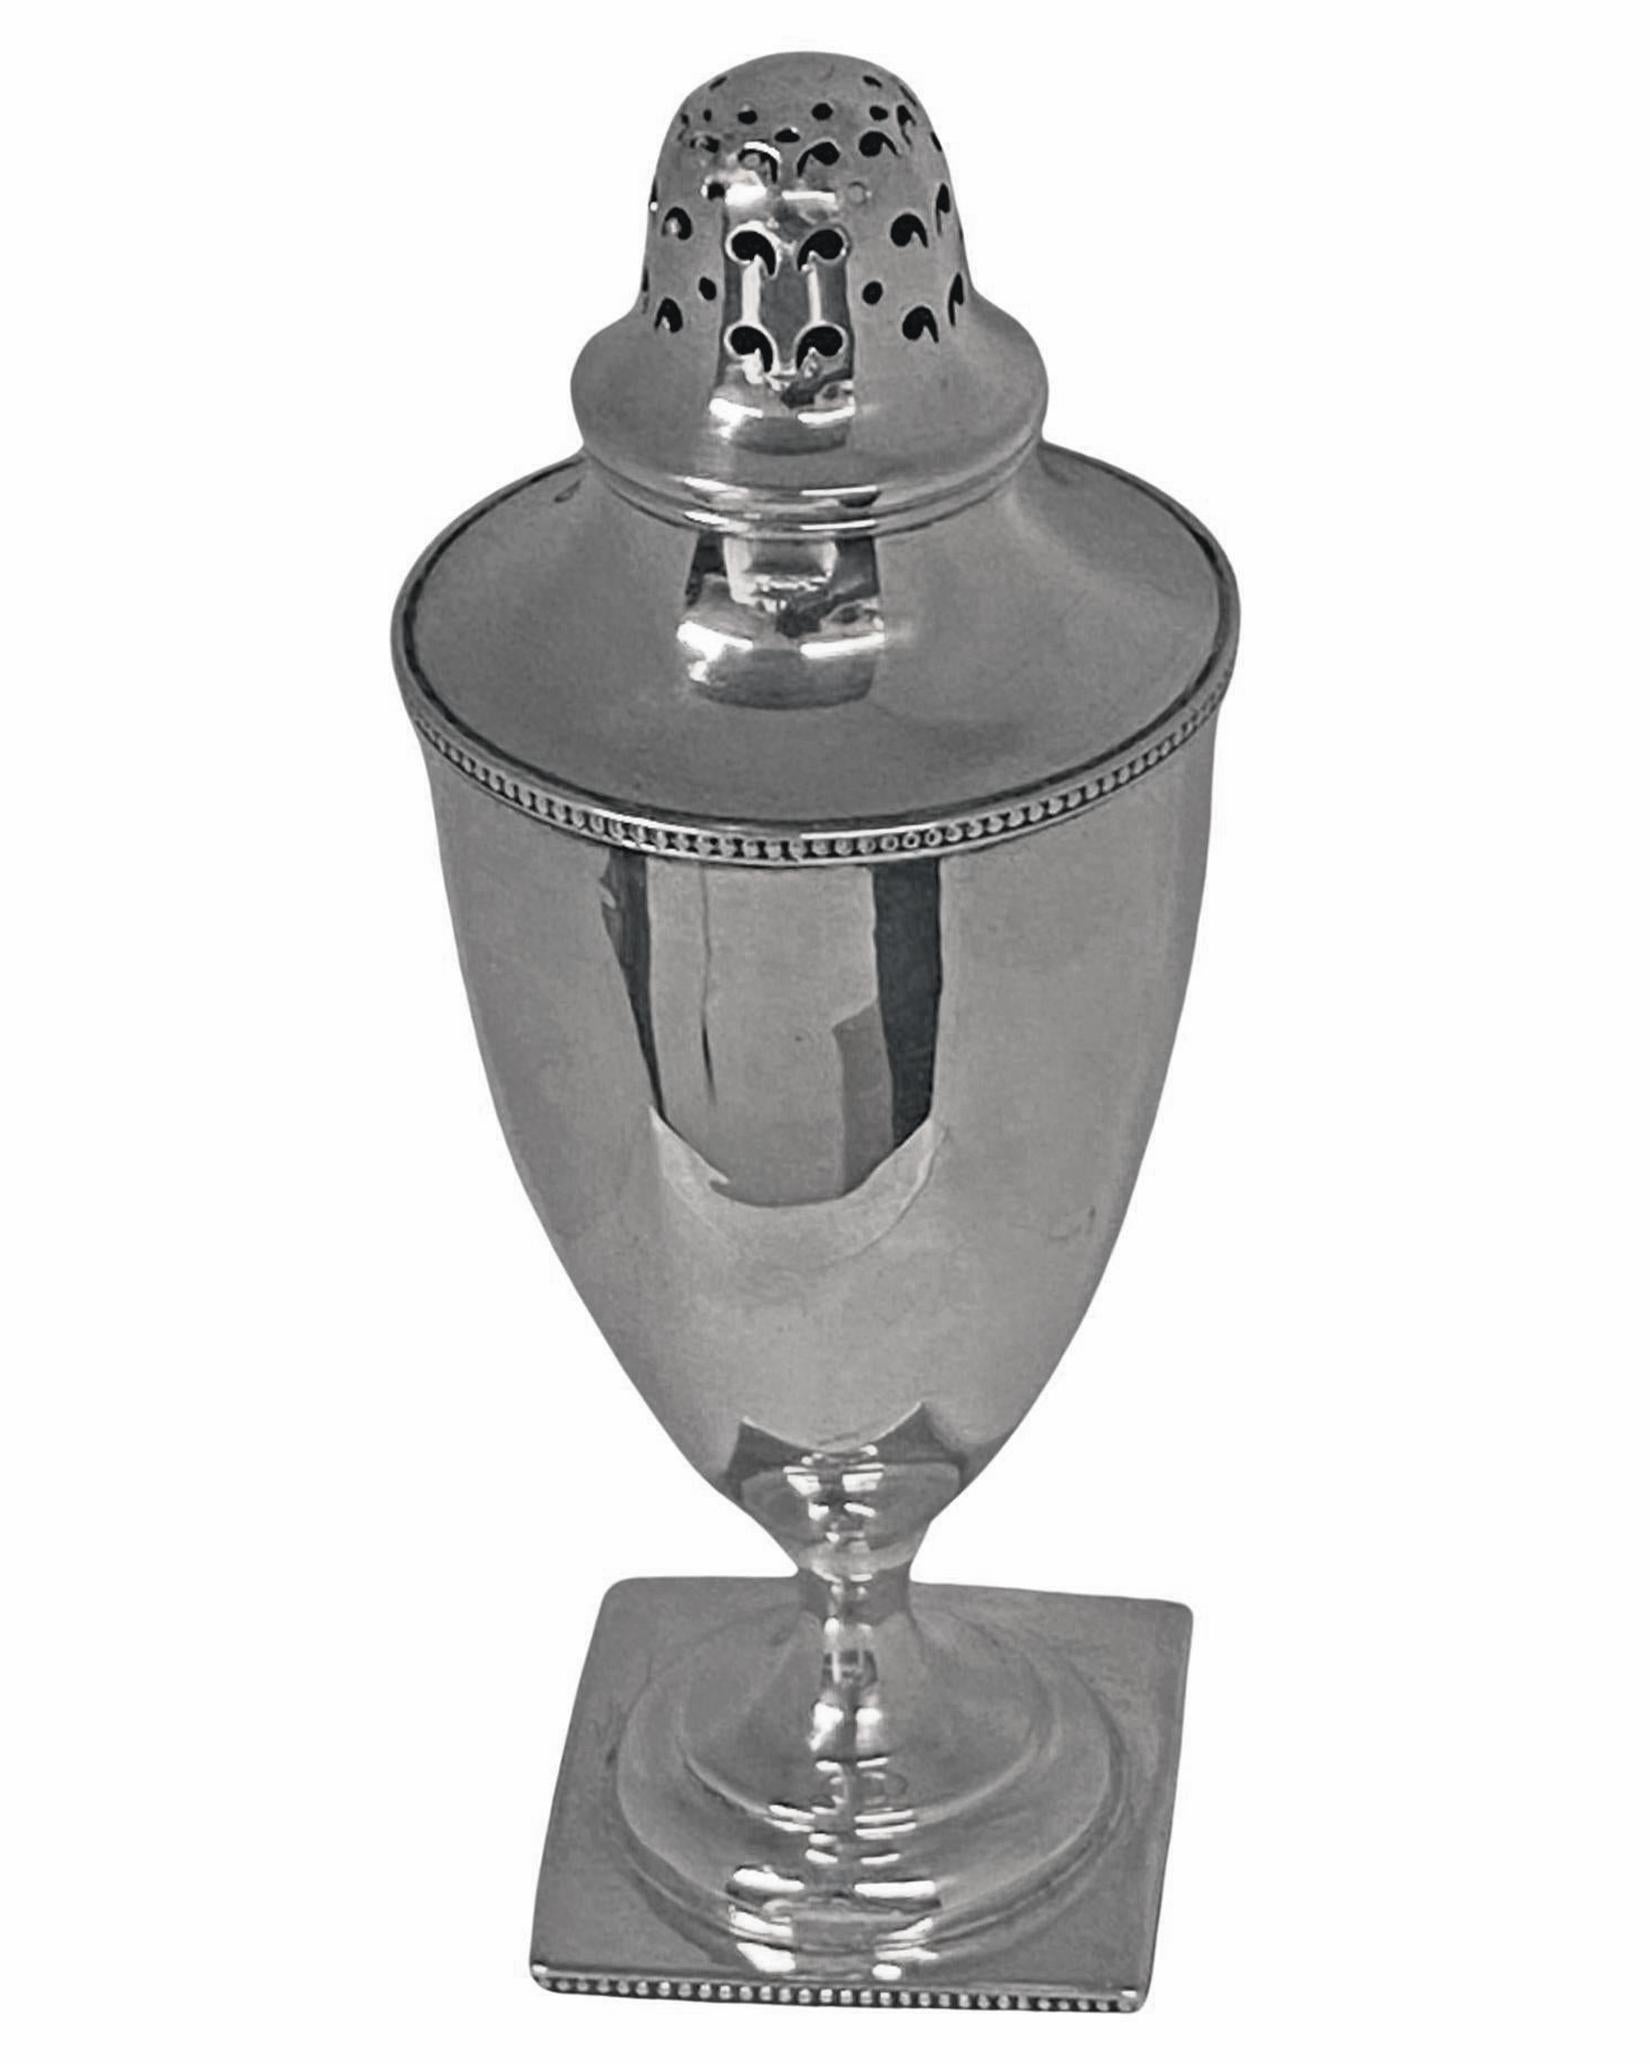 Ryrie Sterling silver Caster, C.1900. Georgian style, vase shaped on square pedestal foot with bead surround. The body plain with monogram possibly G or C to one side, detachable pierced cover. Full Ryrie Sterling hallmarks to underside and stamped